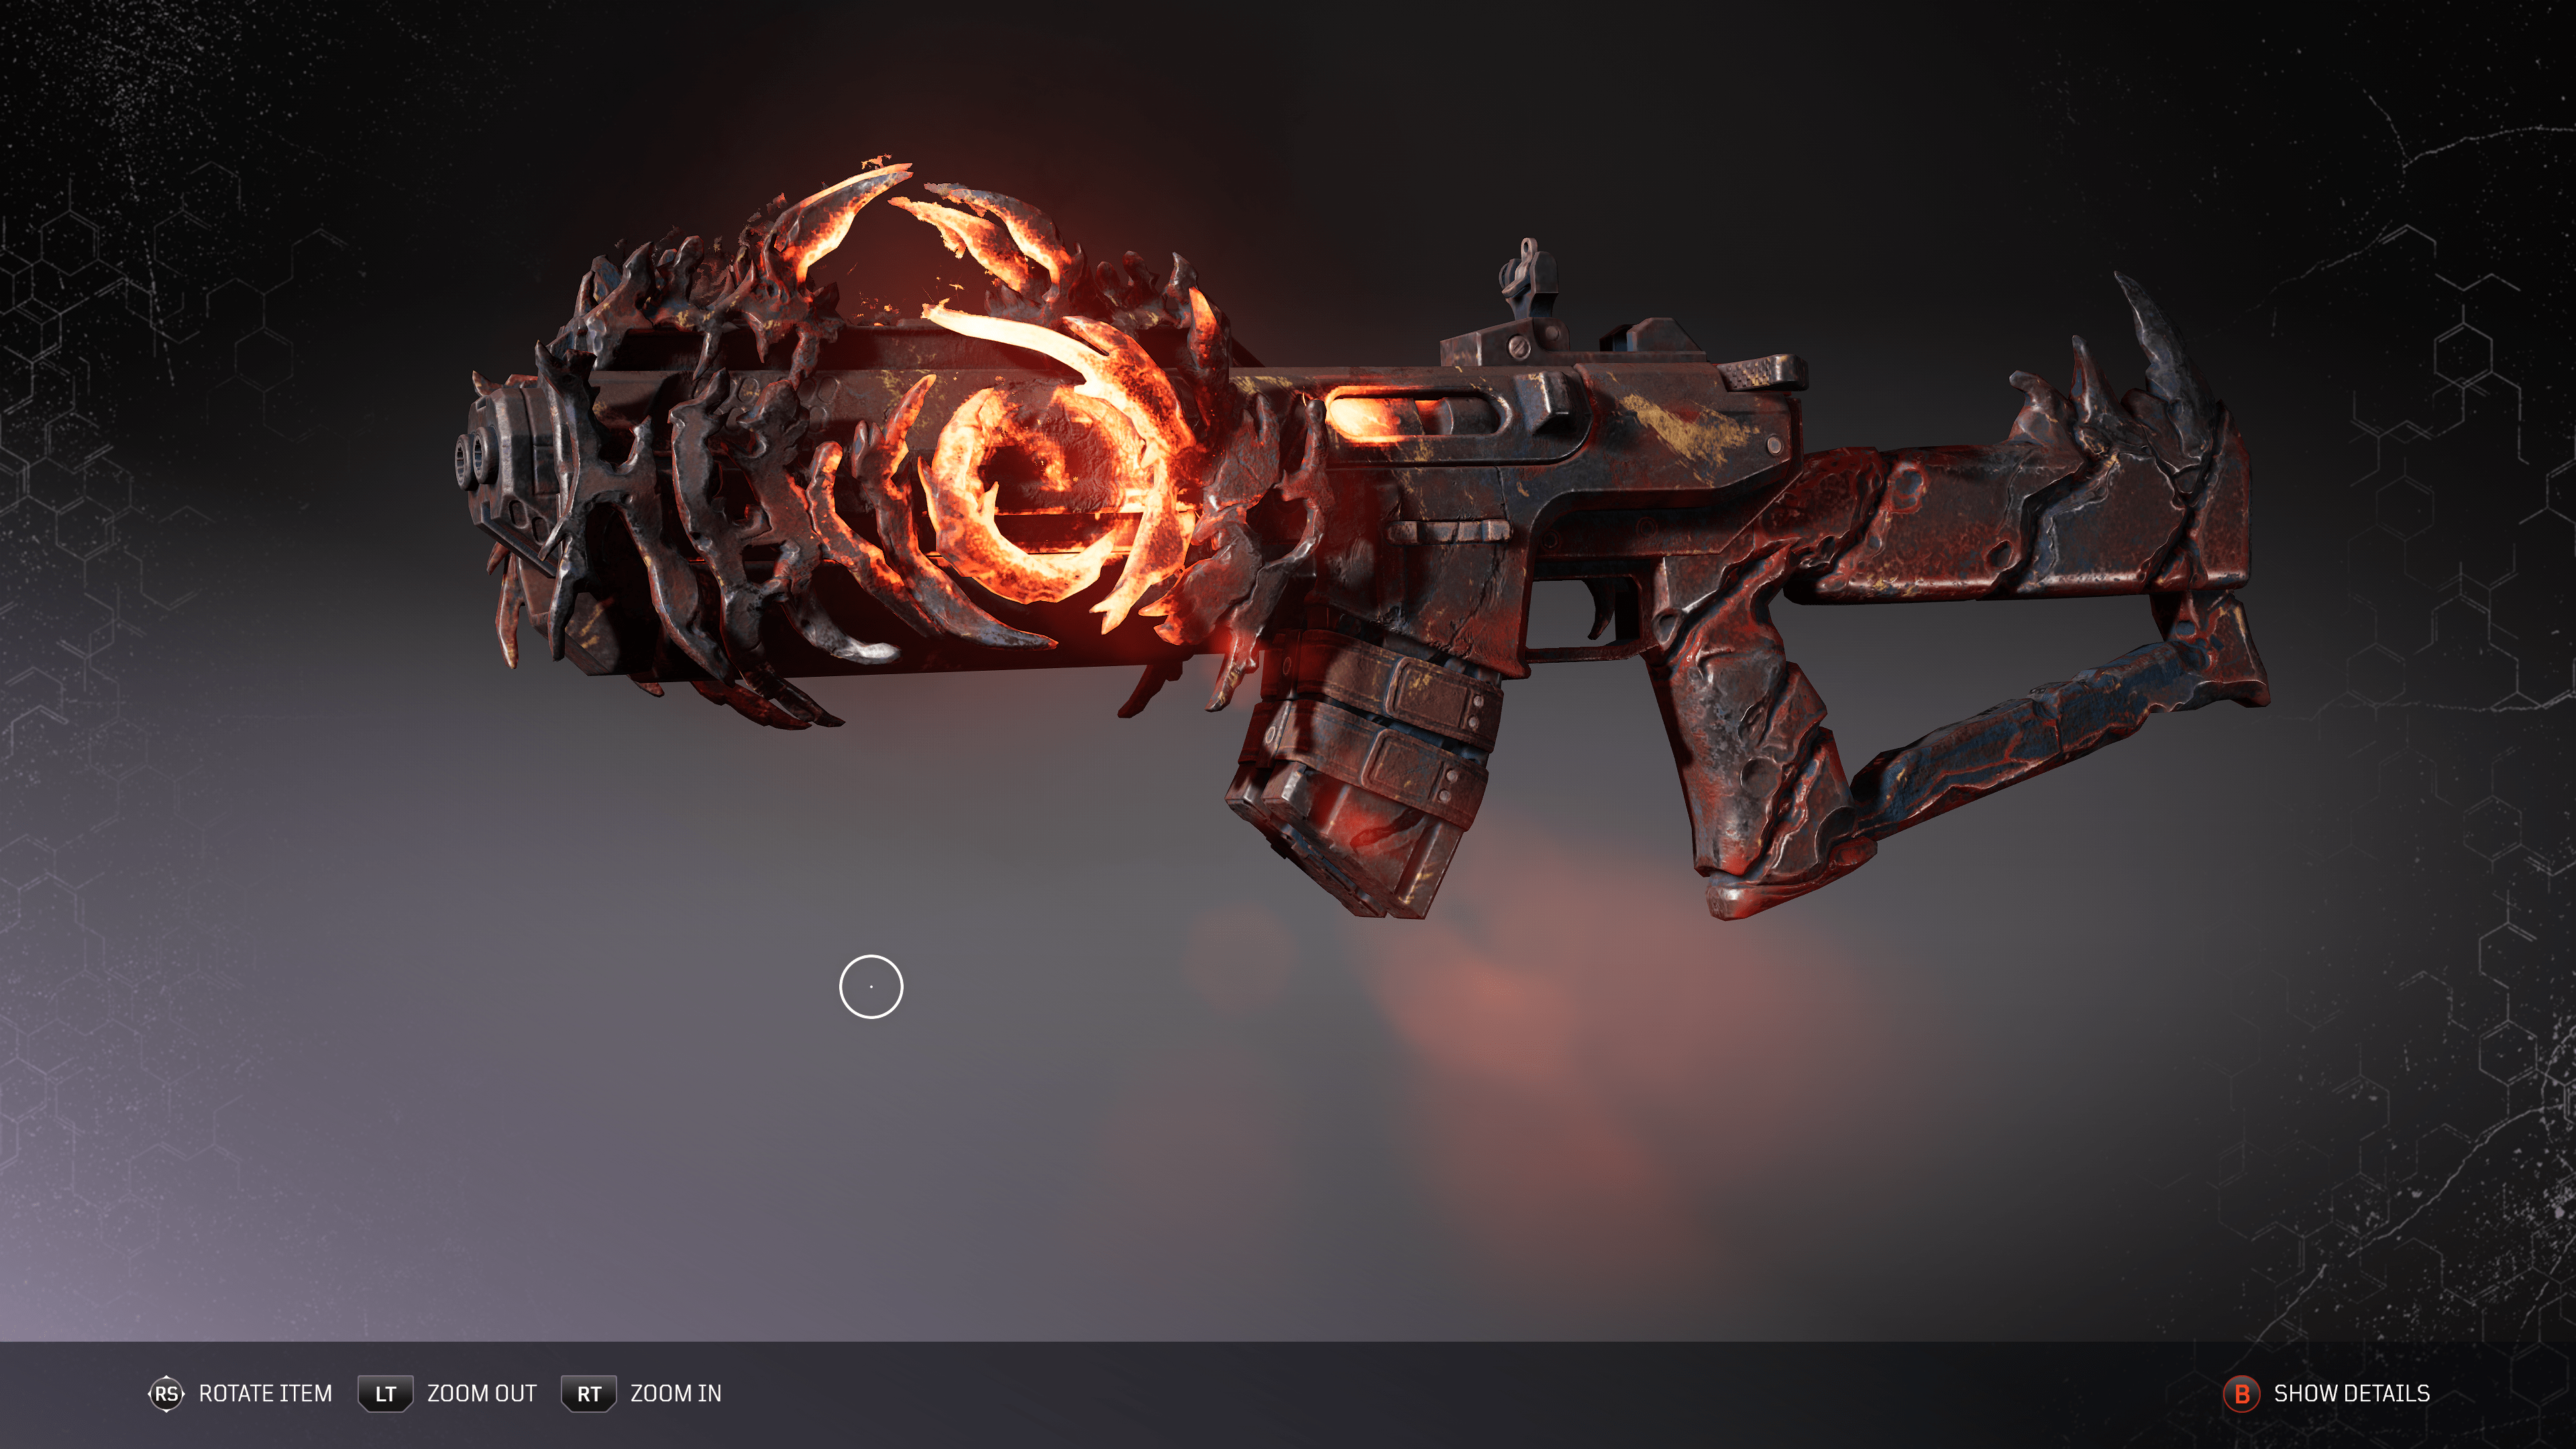 amazin skins, gun formed out of metal glowing hot in the centre.